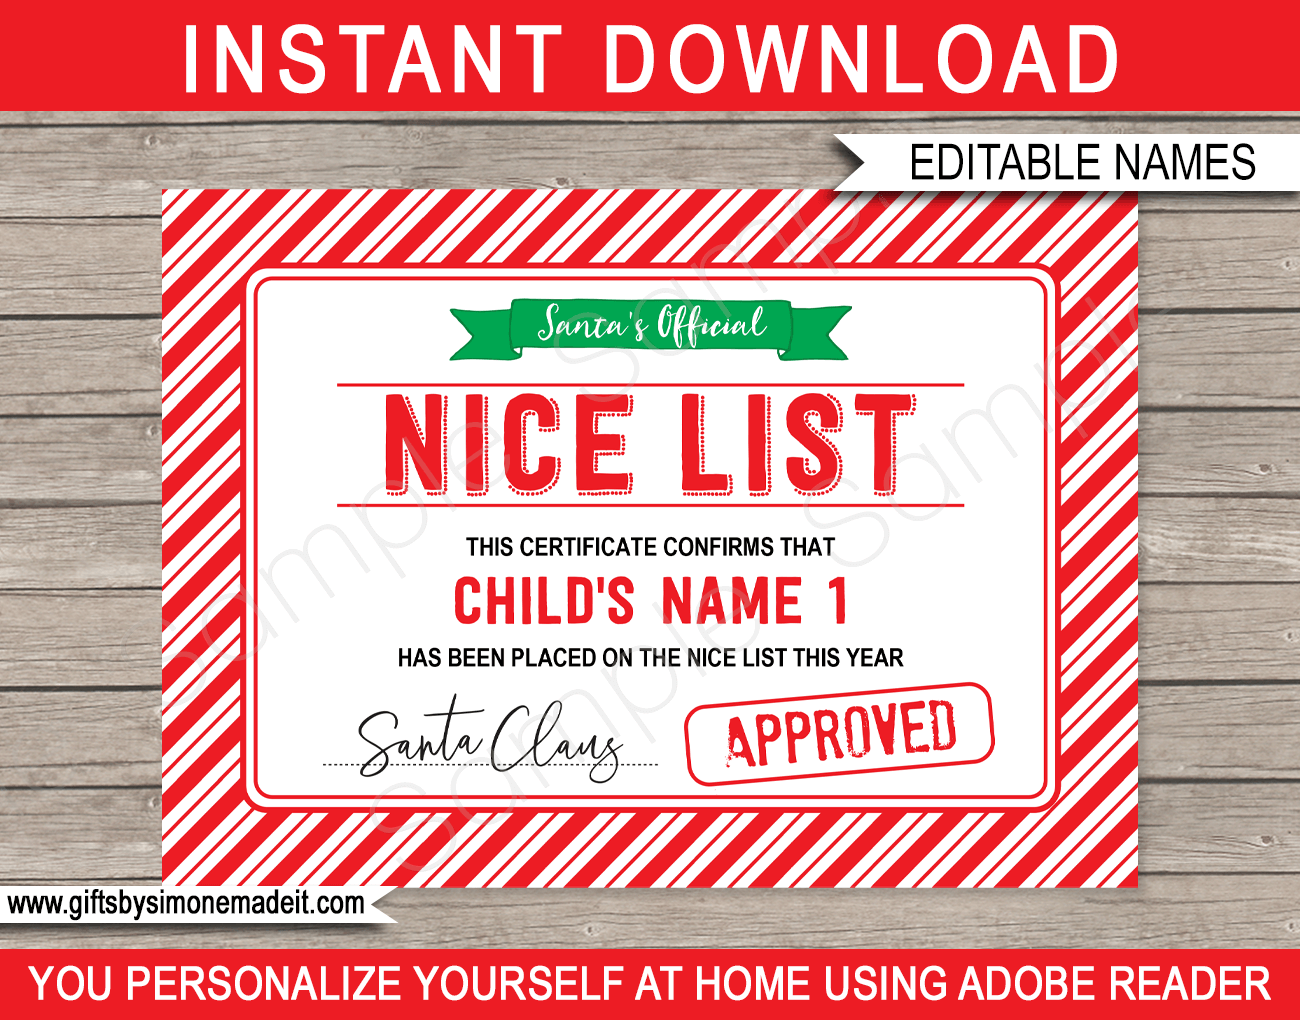 santa-s-nice-list-certificate-template-approved-by-santa-claus